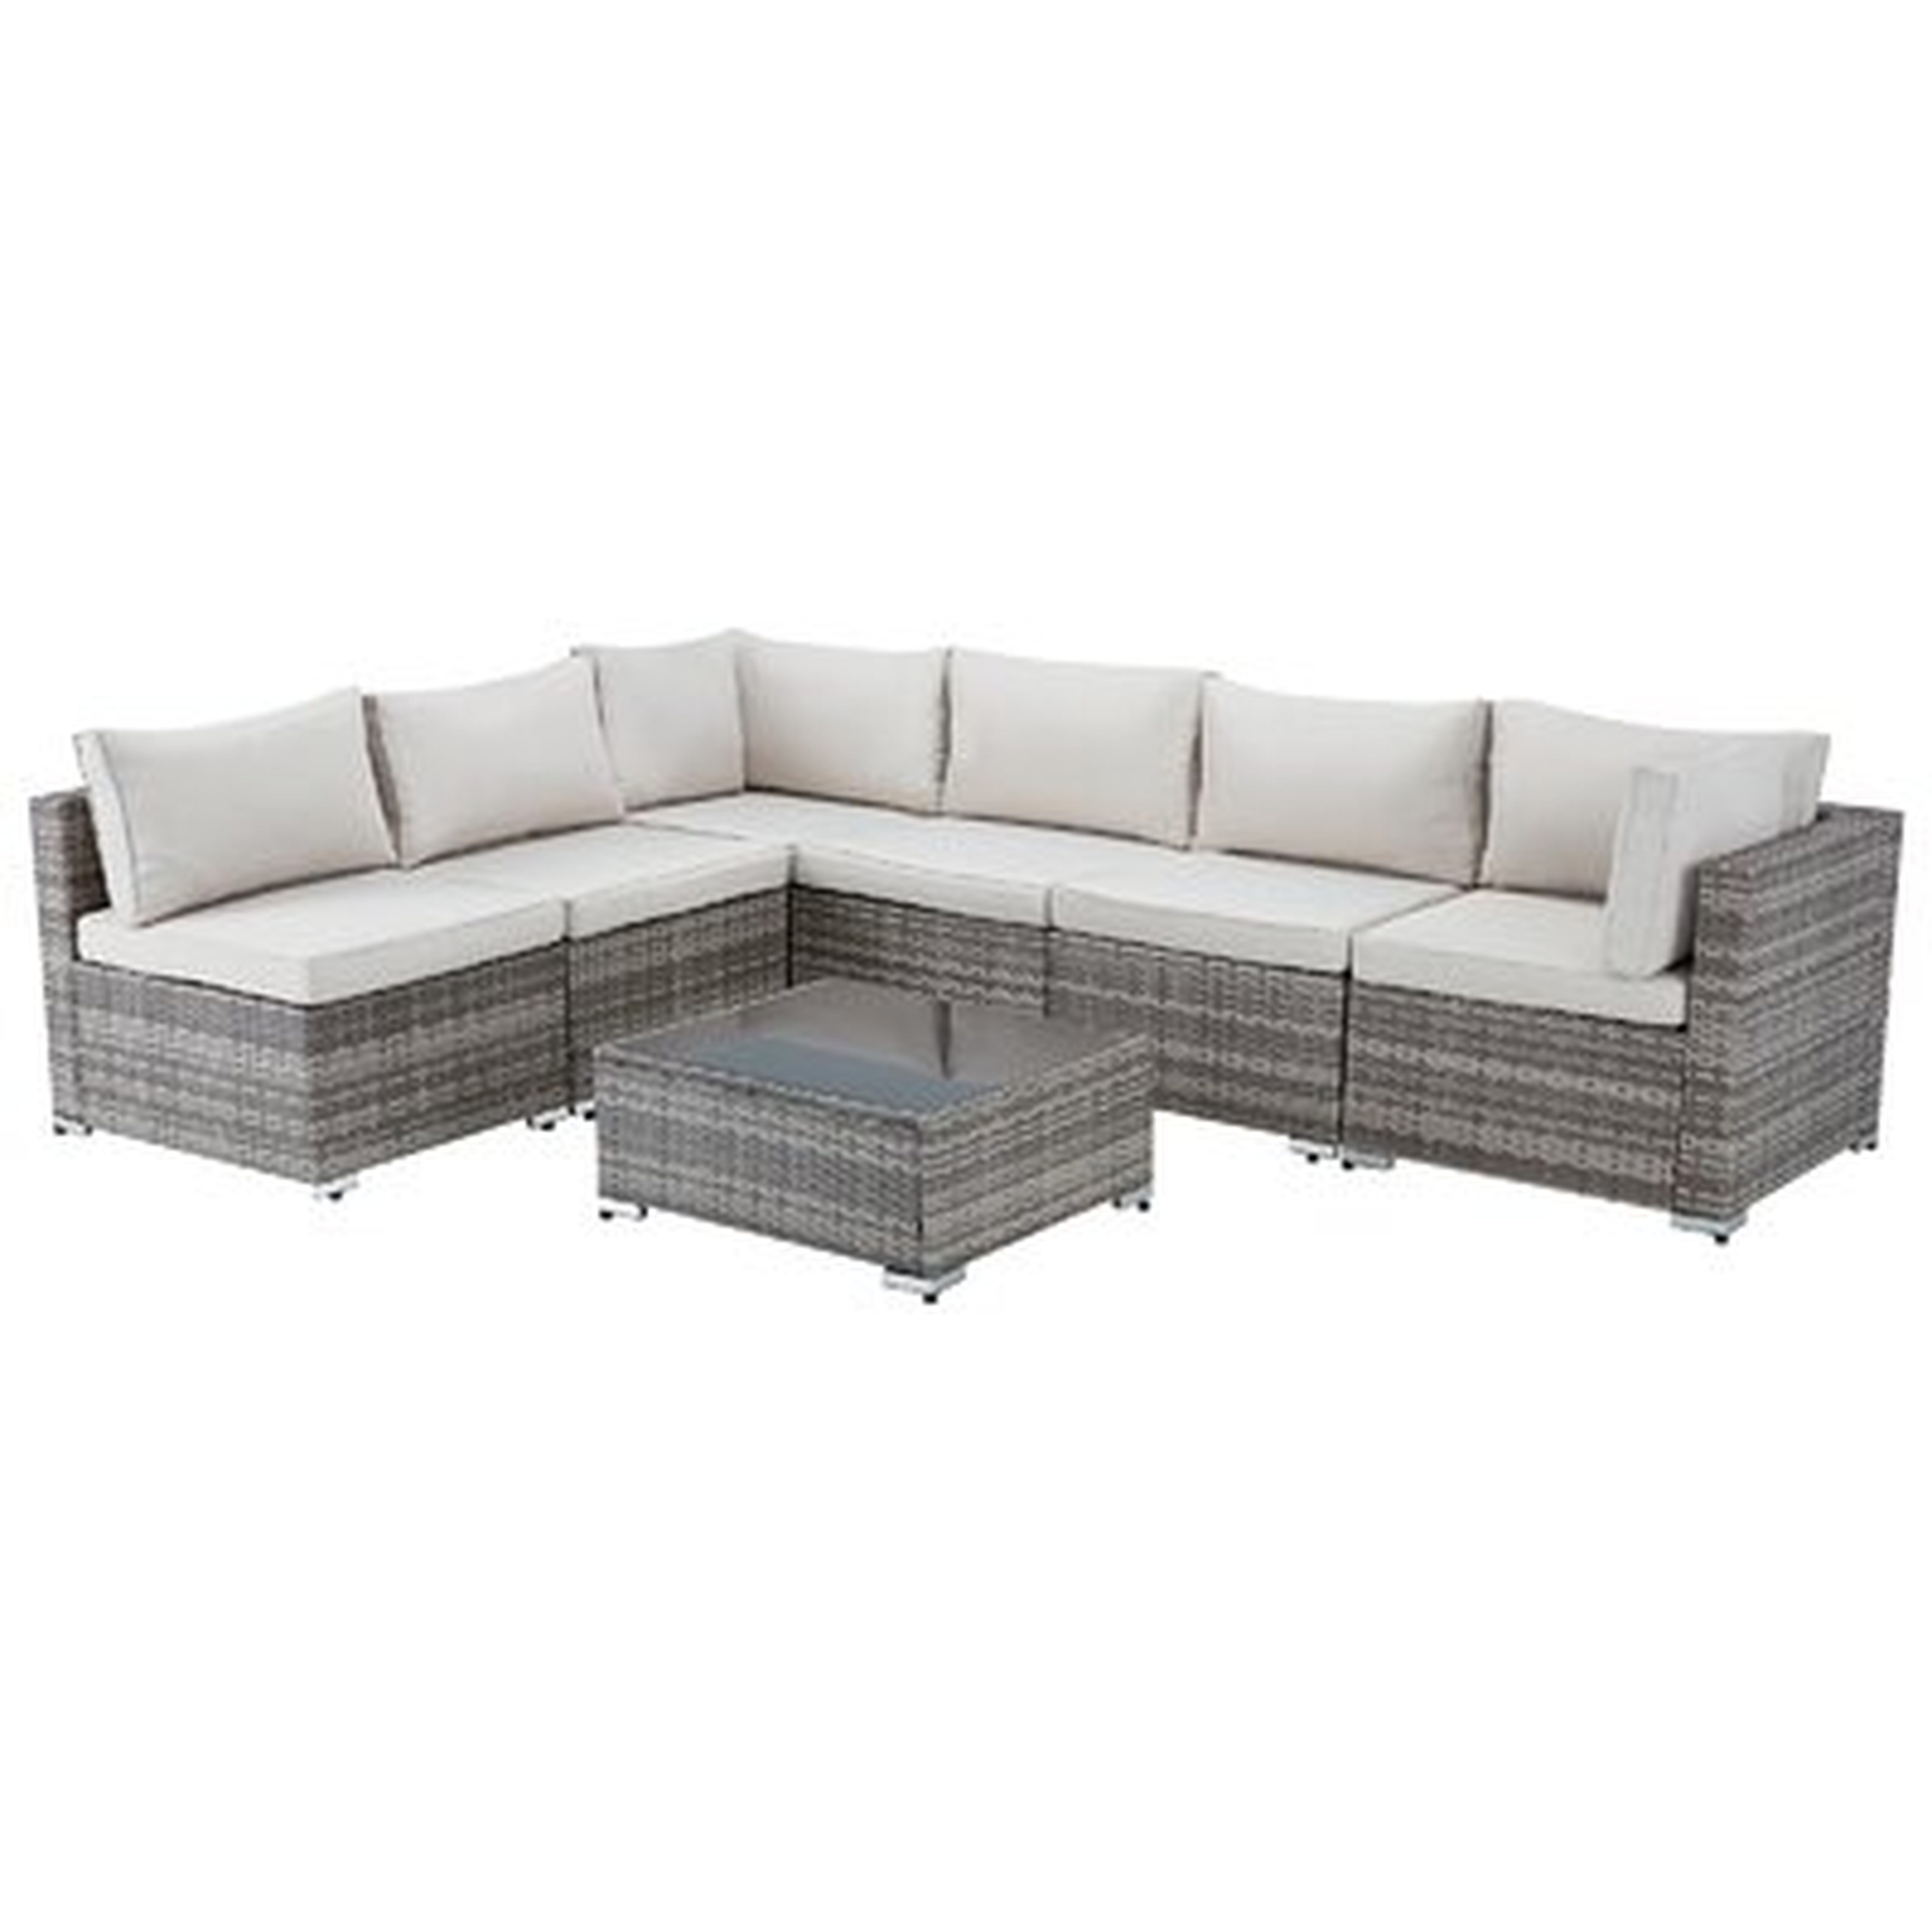 Outdoor Sectional Furniture Chair 7 Piece Set With Cushions And Tea Table, Grey - Wayfair